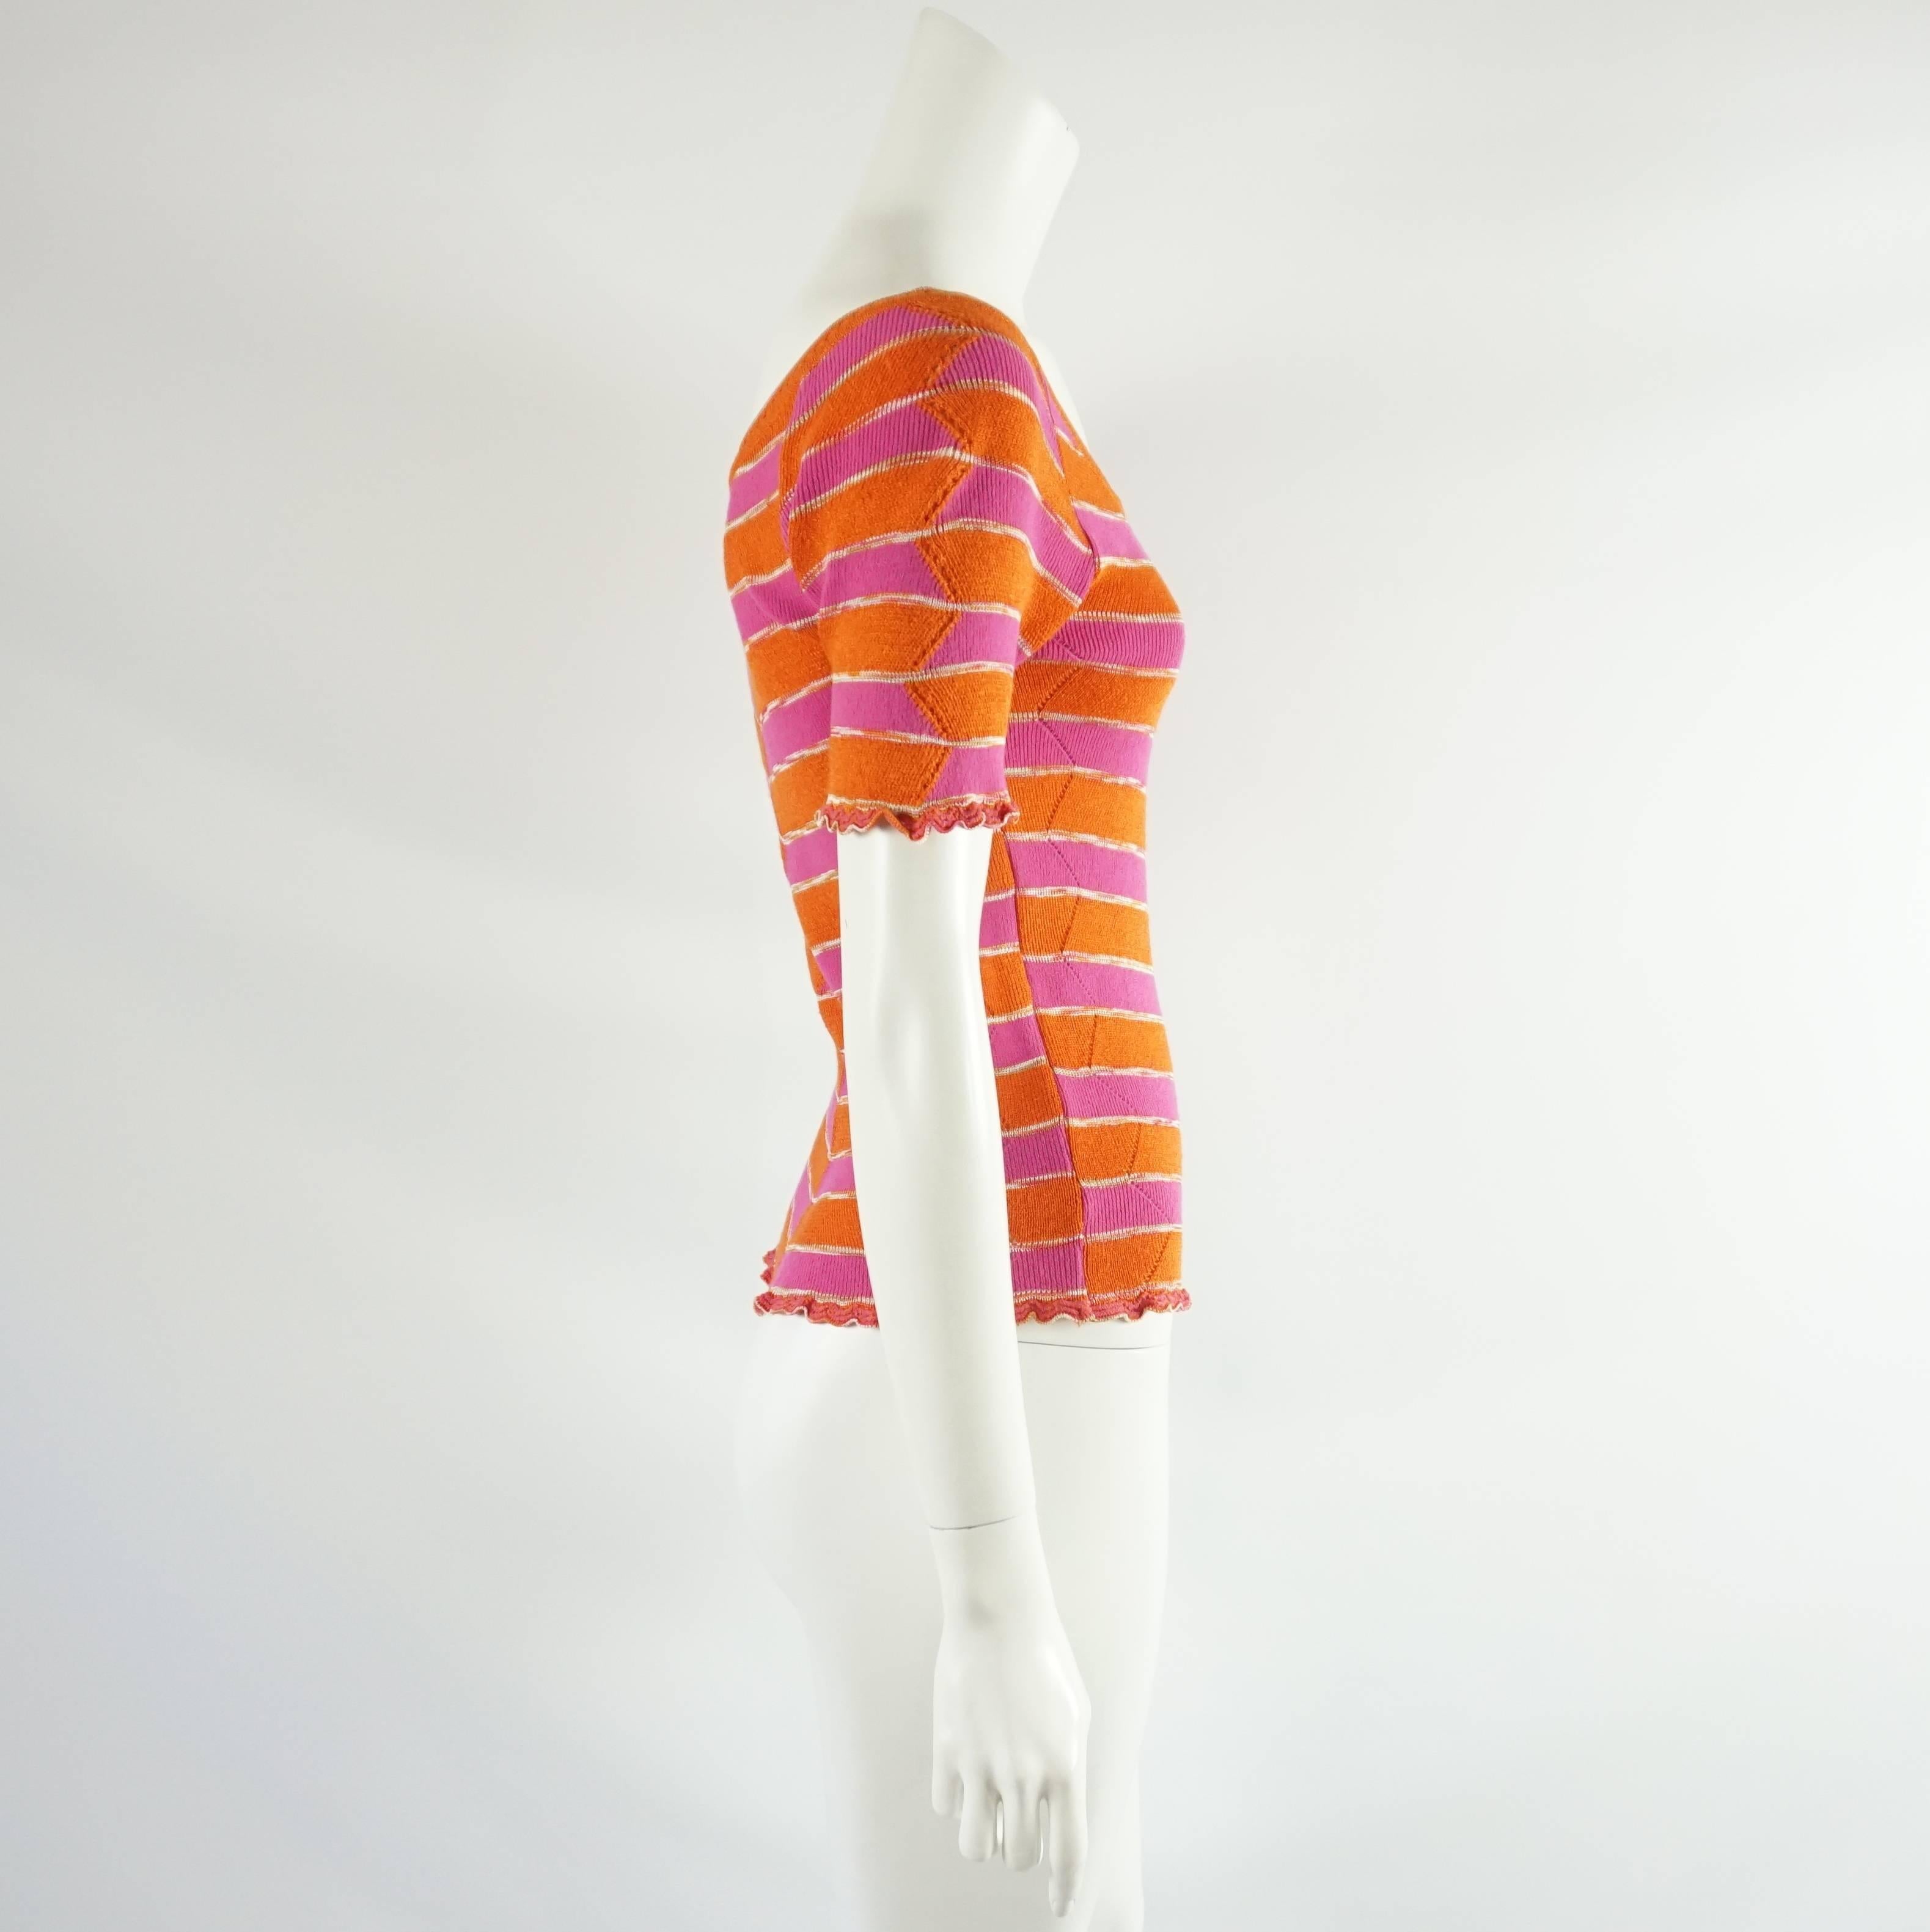 This Missoni knitted top is short sleeved with a v-neck. There are orange and pink stripes with white detailing. There is a small scallop trim on the sleeves and shirt hem. This shirt is in excellent condition. Size small.

Measurements
Sleeve